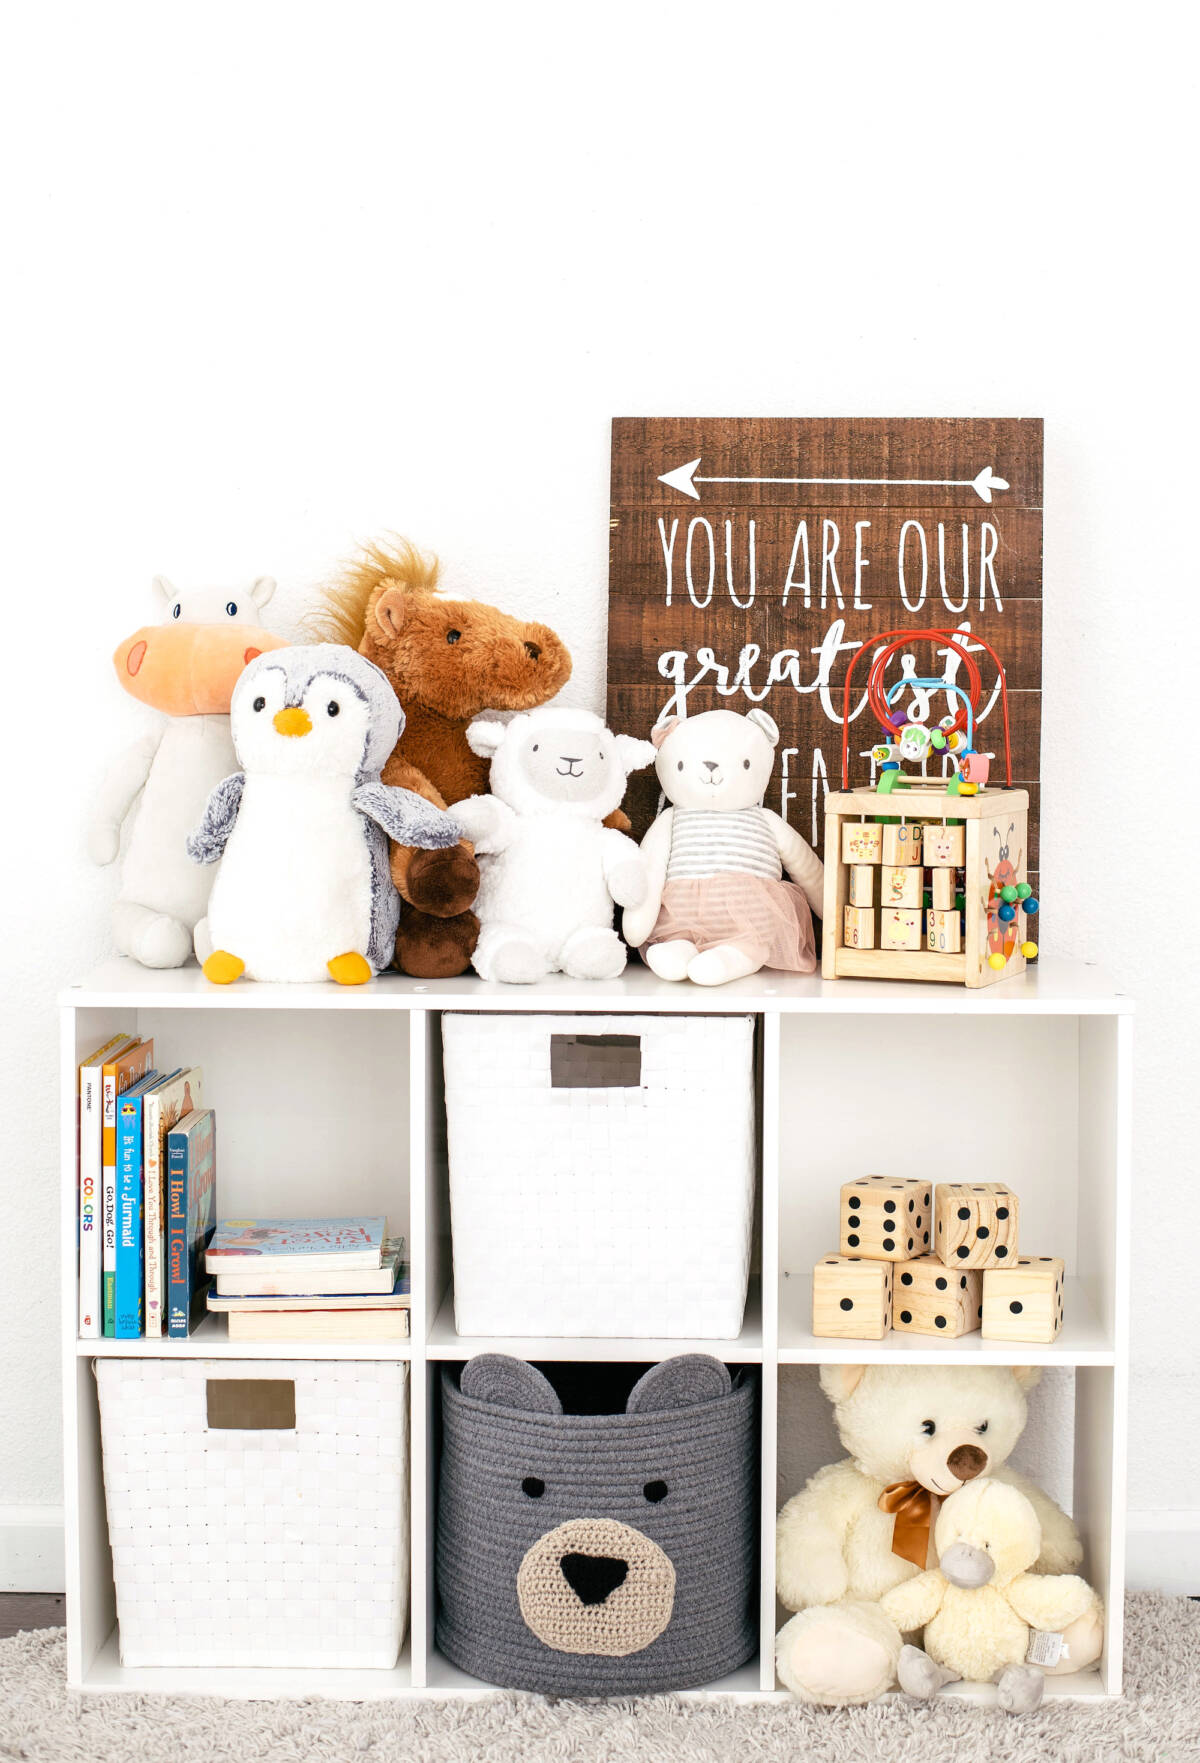 Love from Lisa parenting and lifestyle blog - kids bookshelf with toys.